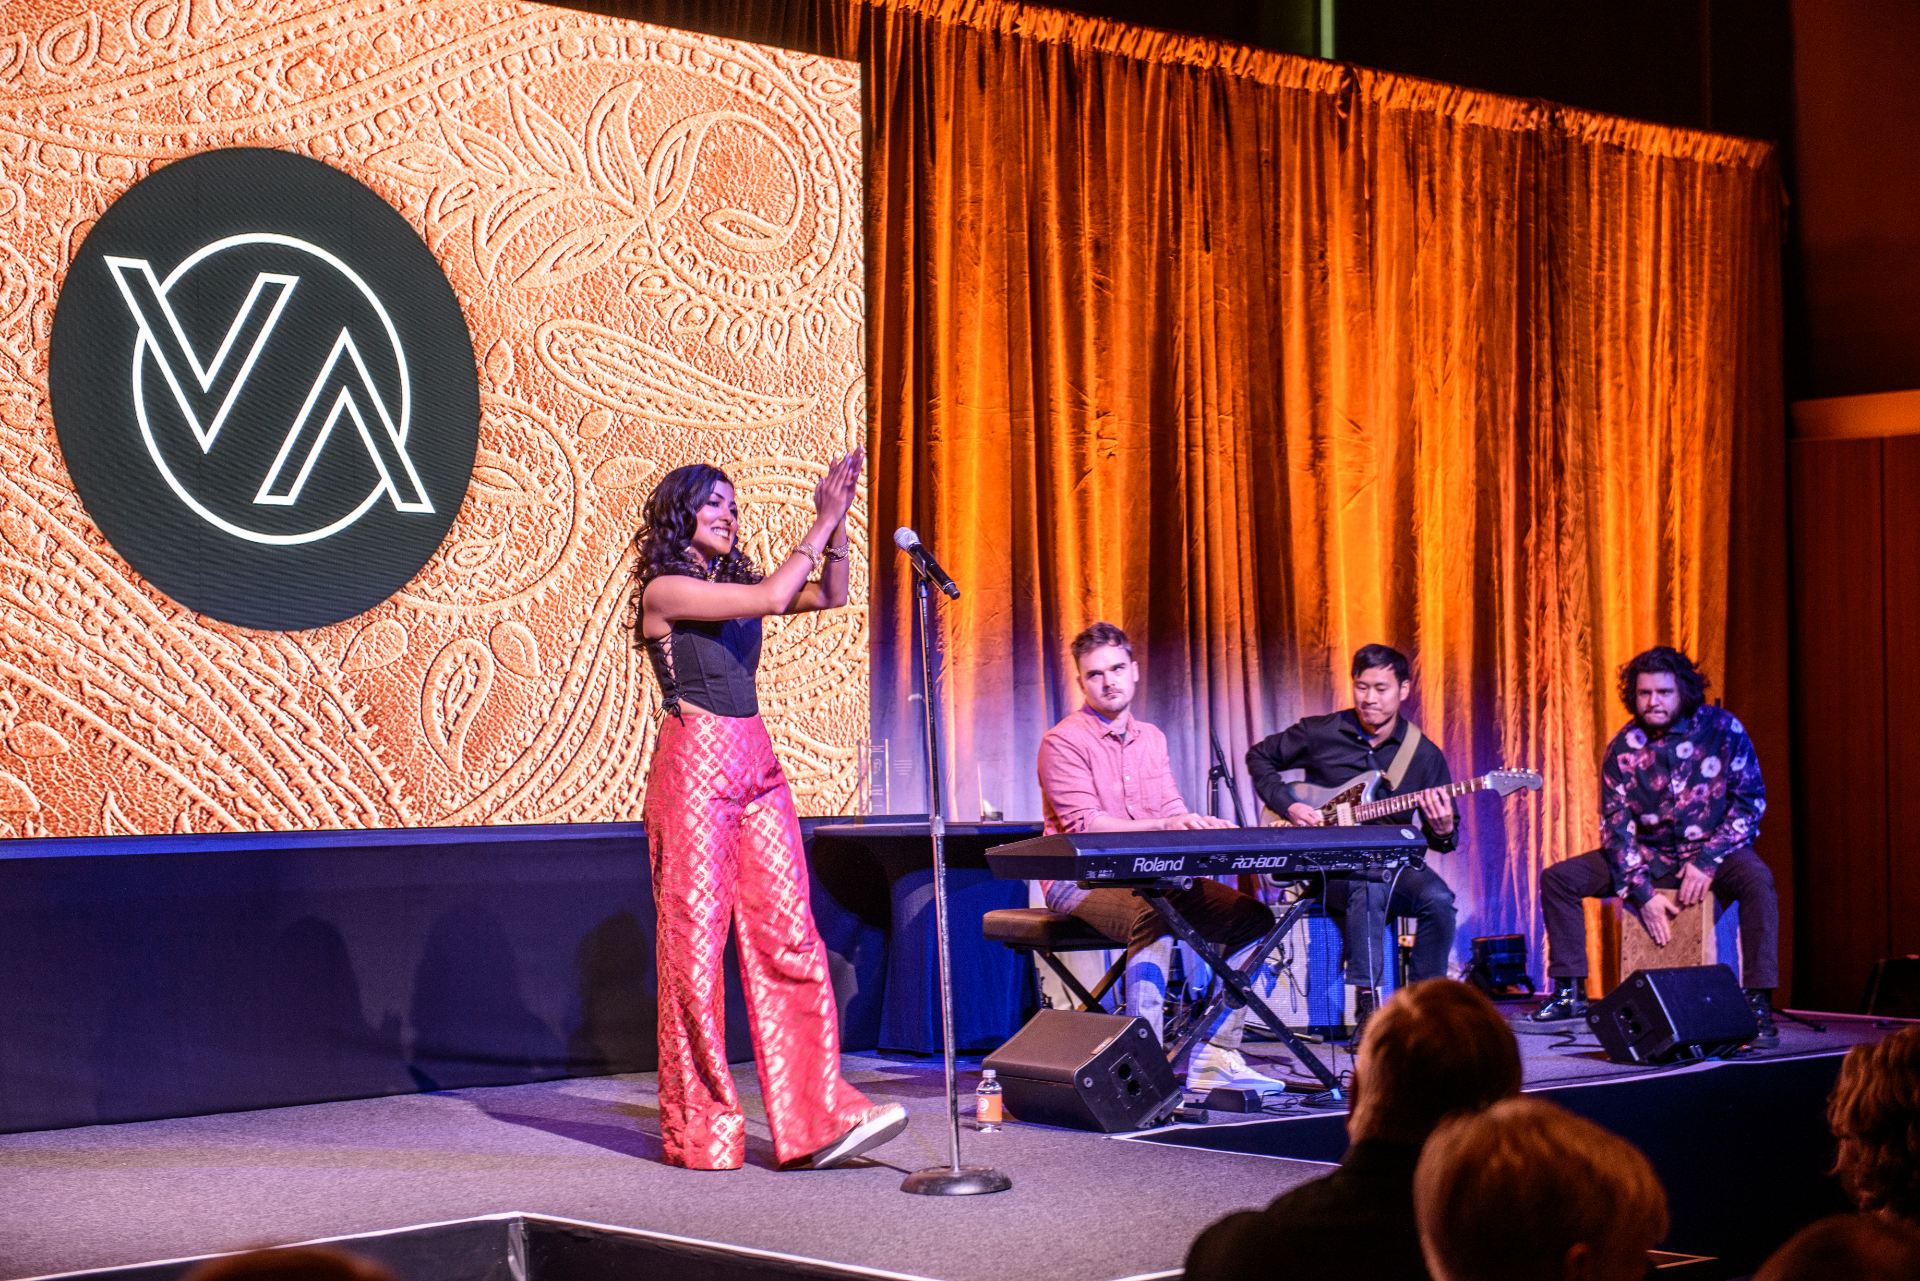 Indian music star Vidya Vox performing on stage.